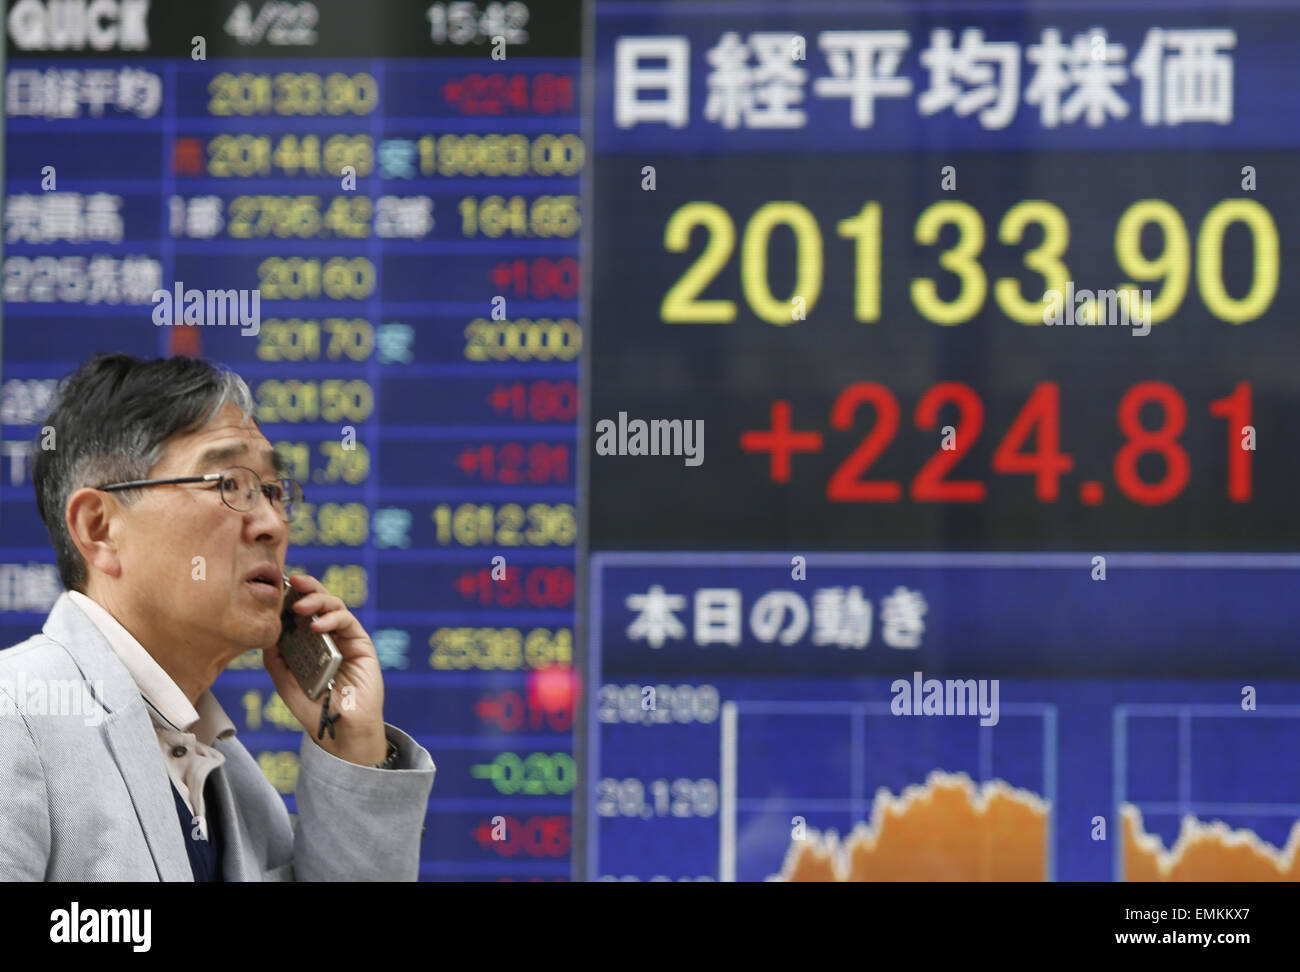 Tokyo, Japan. 22nd Apr, 2015. A man walks past an electronic board showing the stock index in Tokyo, Japan, on April 22, 2015. The 225-issue Nikkei index jumped 224.81 points, or 1.13 percent, from Tuesday at 20,133.90, the highest close since April 2000. © Stringer/Xinhua/Alamy Live News Stock Photo